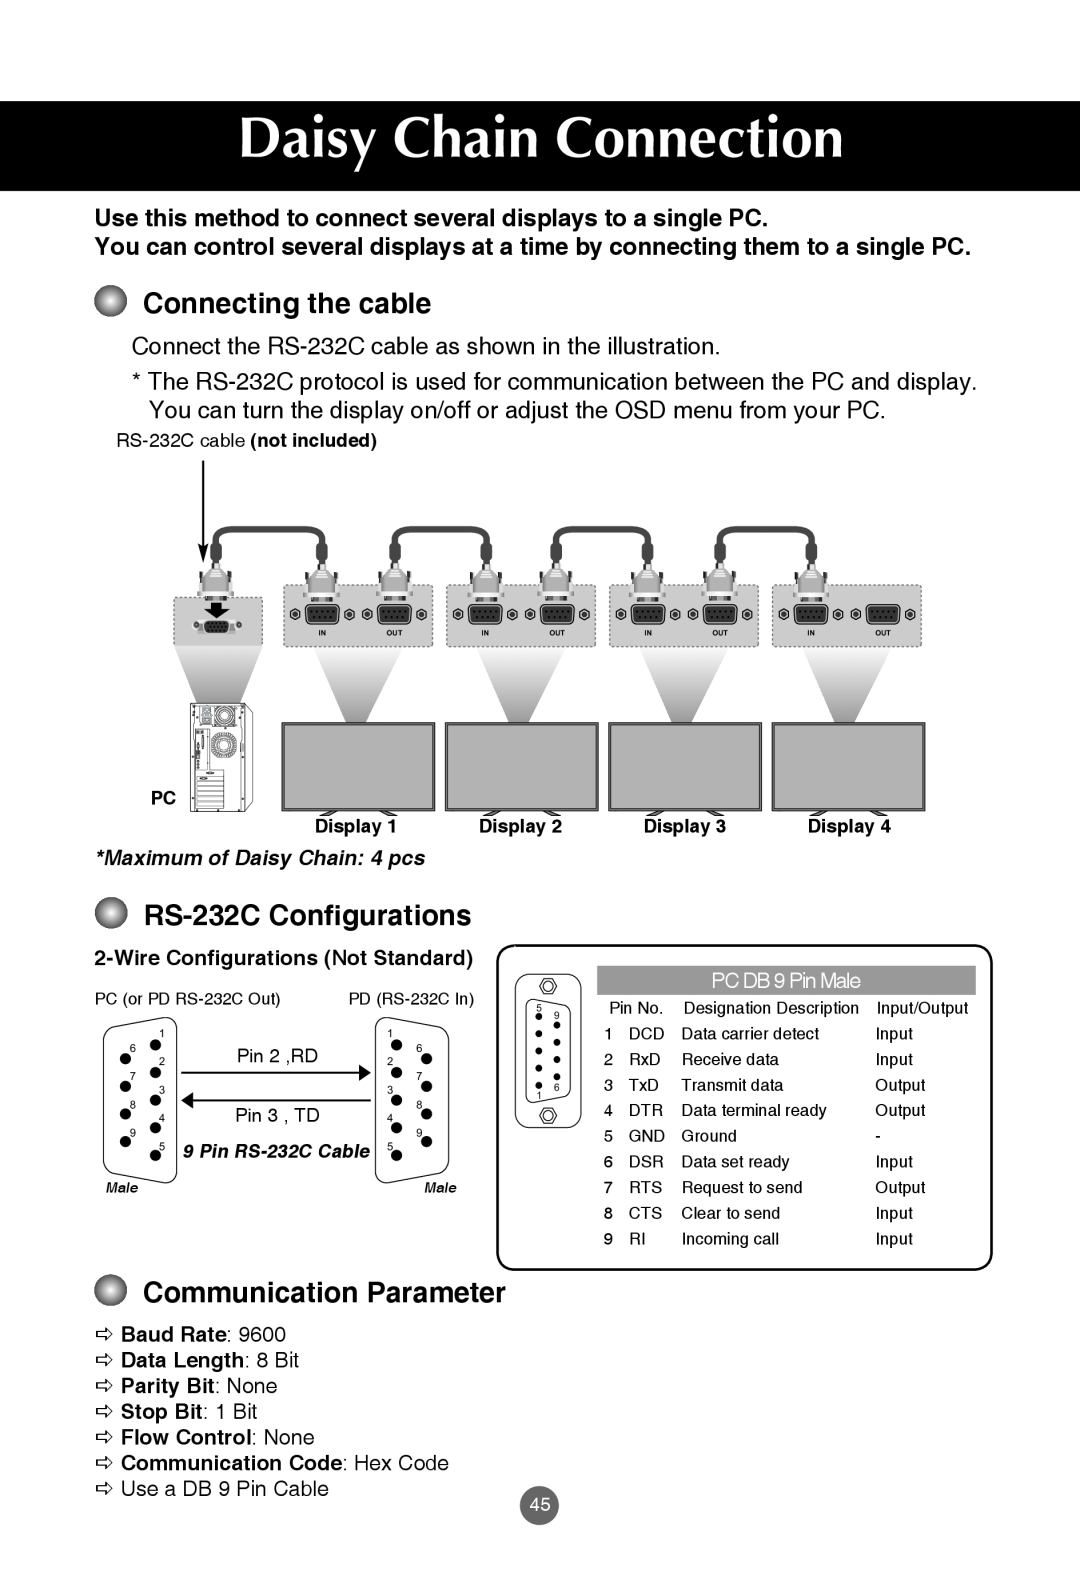 JVC rs-840UD owner manual Daisy Chain Connection, Connecting the cable, RS-232C Configurations, Communication Parameter 